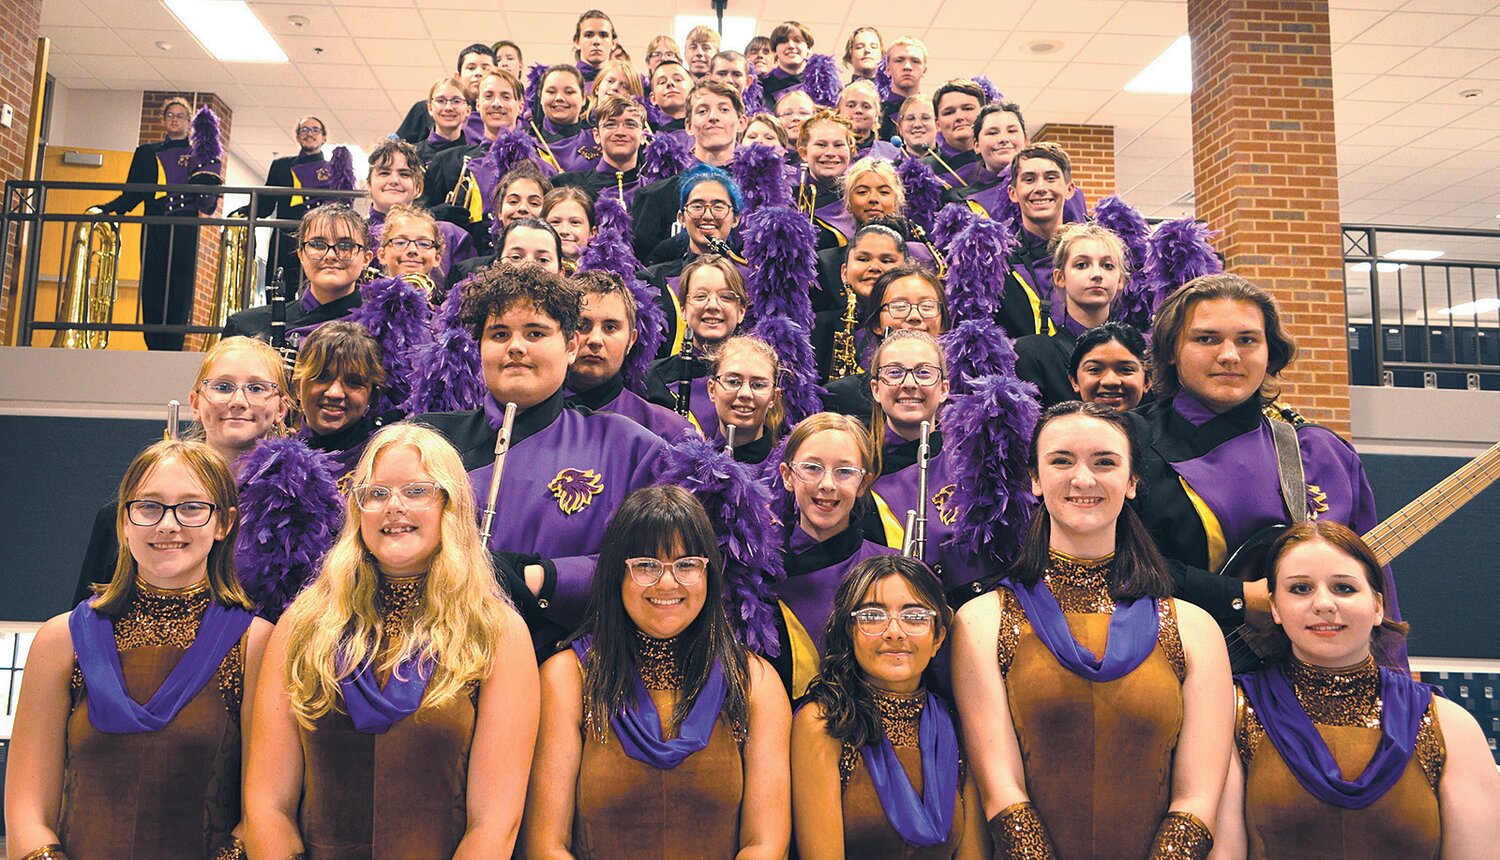 Members of Montgomery County United will compete with seven other marching bands at the Golden Lion Invitational at 8 p.m. Thursday at Crawfordsville High School.